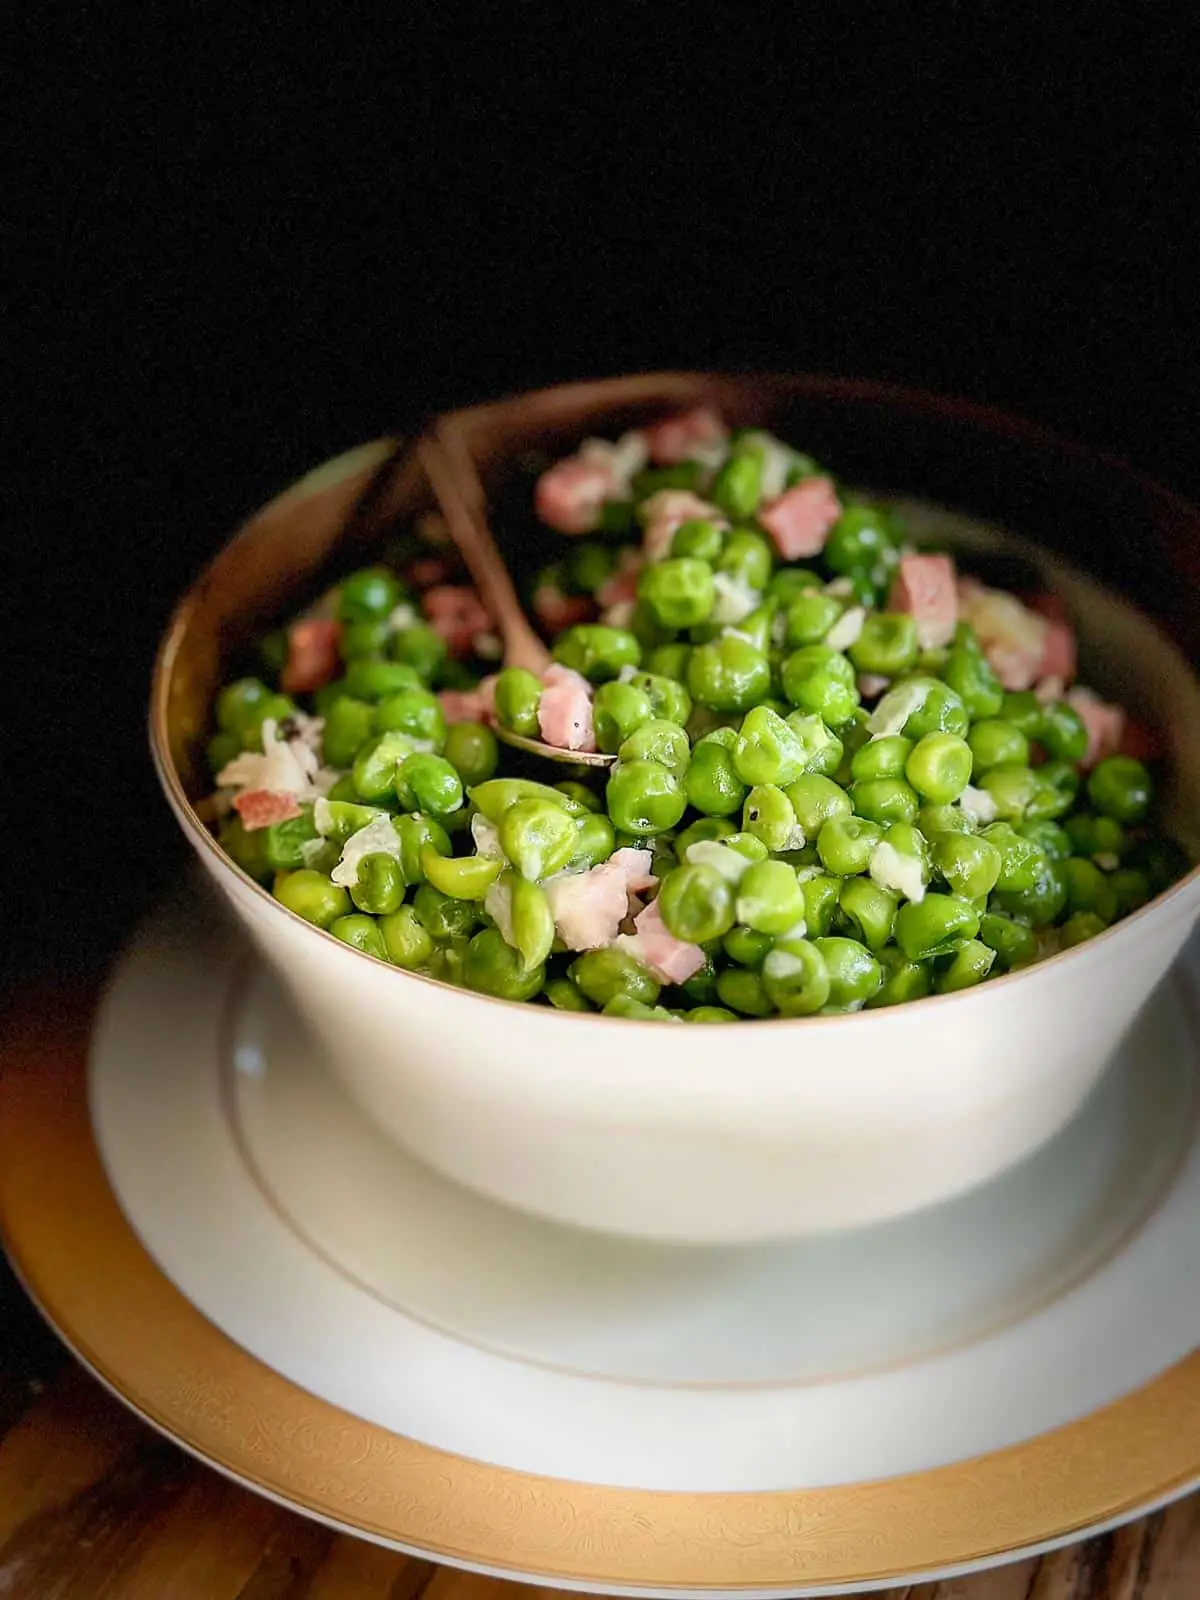 A gold rimmed bowl containing peas, ham, and onion with a gold stemmed spoon resting in the bowl. Part of the picture is in shadow giving it a moody look.